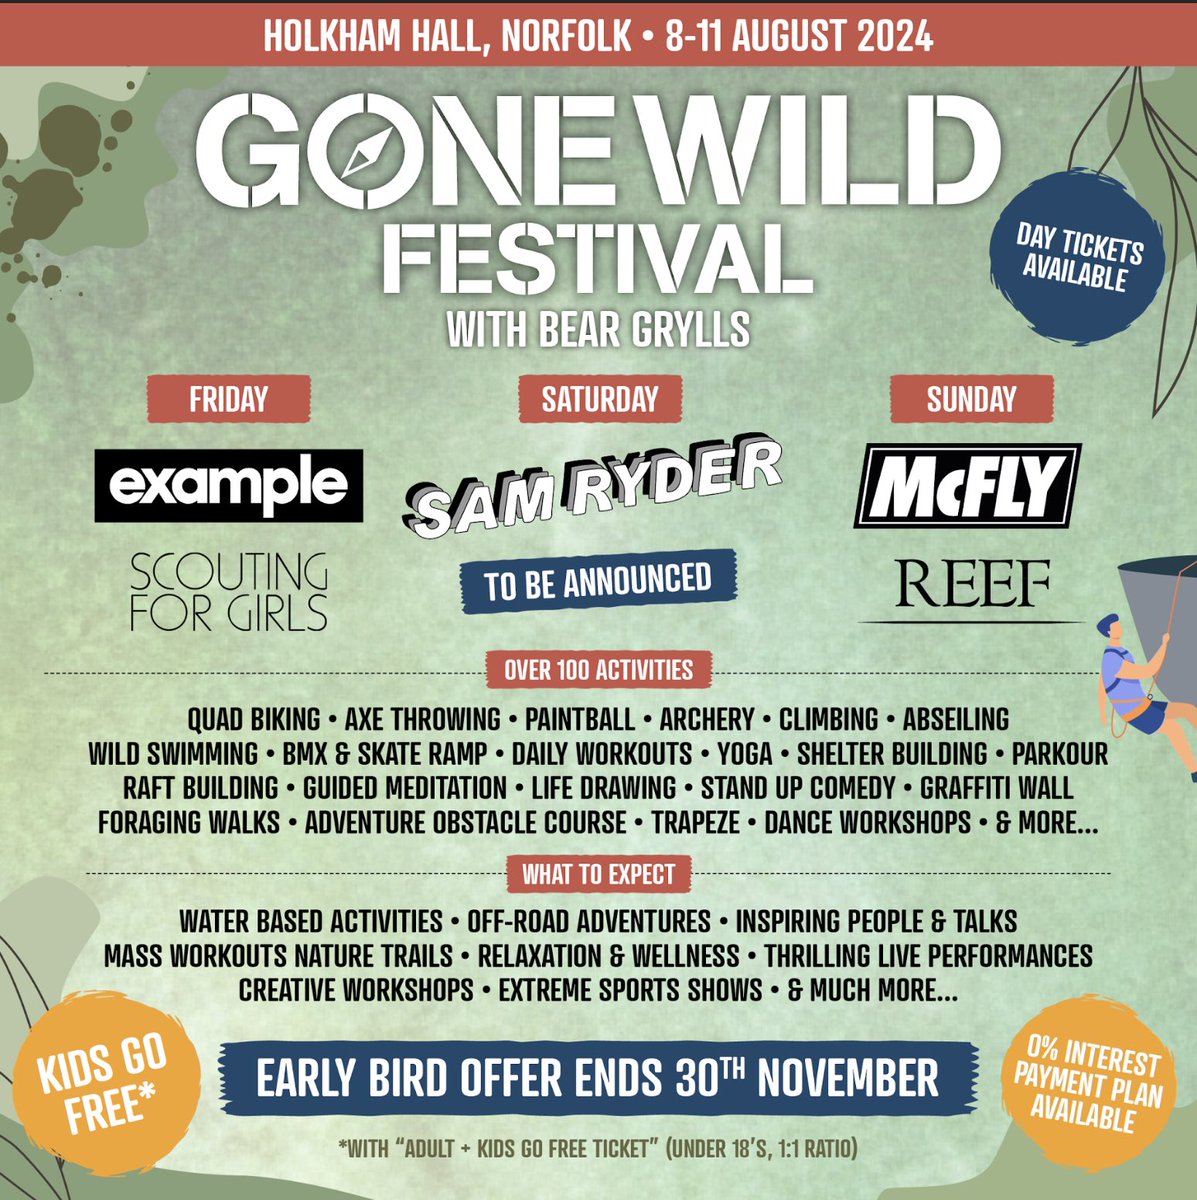 Stoked to announce we’ve been invited back to @Gonewildfest , Norfolk next Summer… See you there ❤️

#gonewildfestival #gonewild #festival #festivals #ukfestivals #summer #reefband #reeflive #reef #garystringer #jackbessant #lukebullen #amynewton #beargrylls